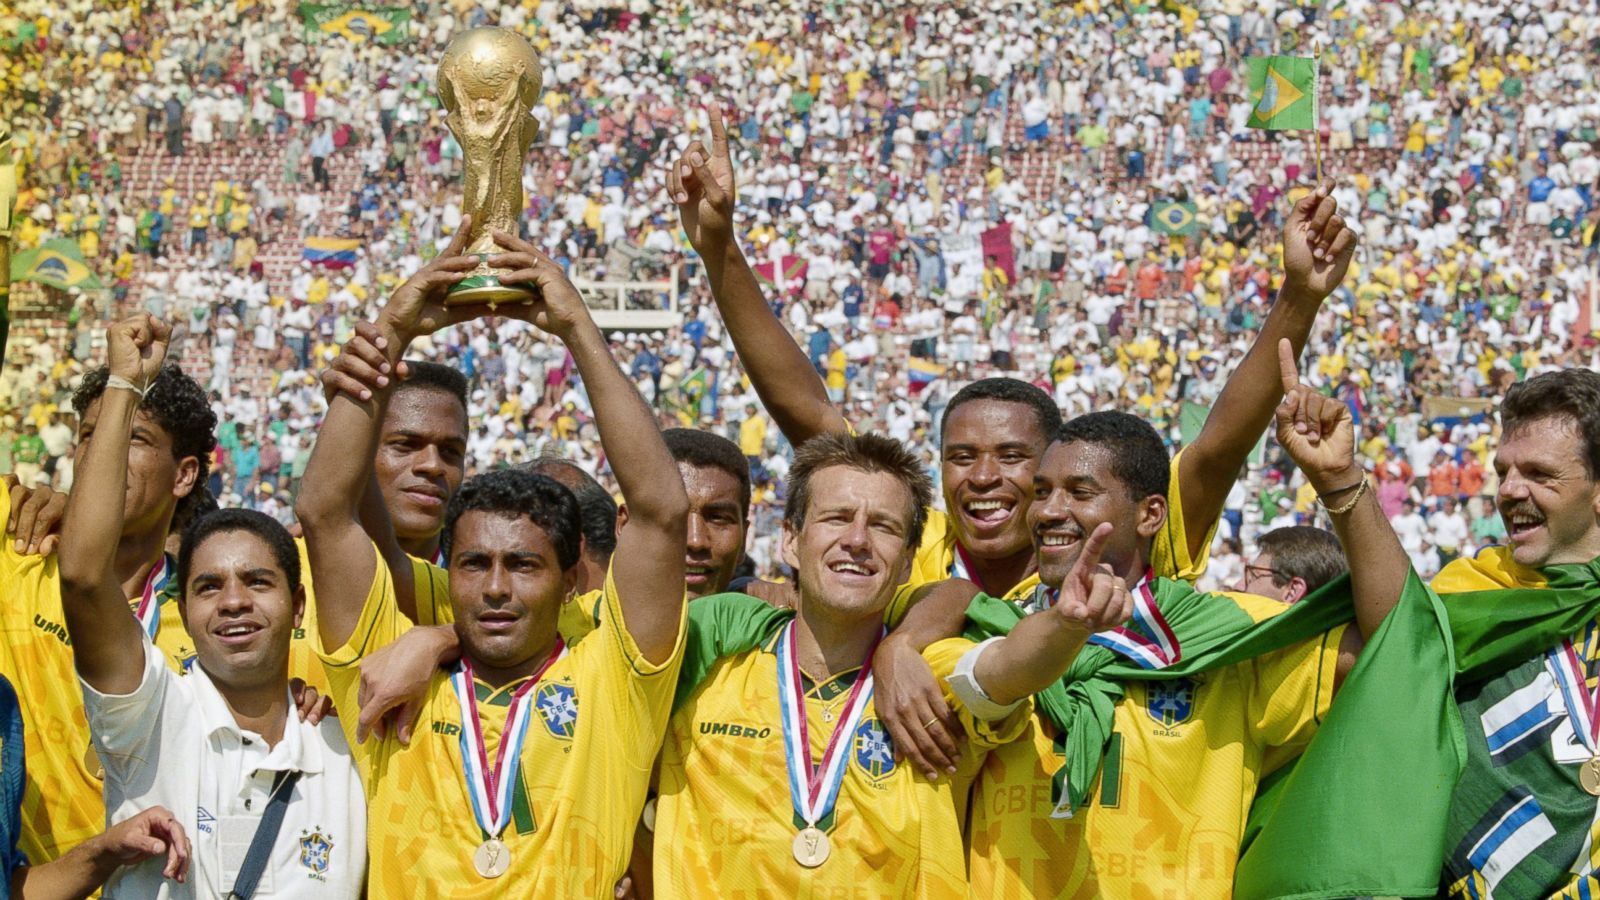 Brazilian soccer national team holding the World Cup. Photo: Ben Radford \ Getty Images